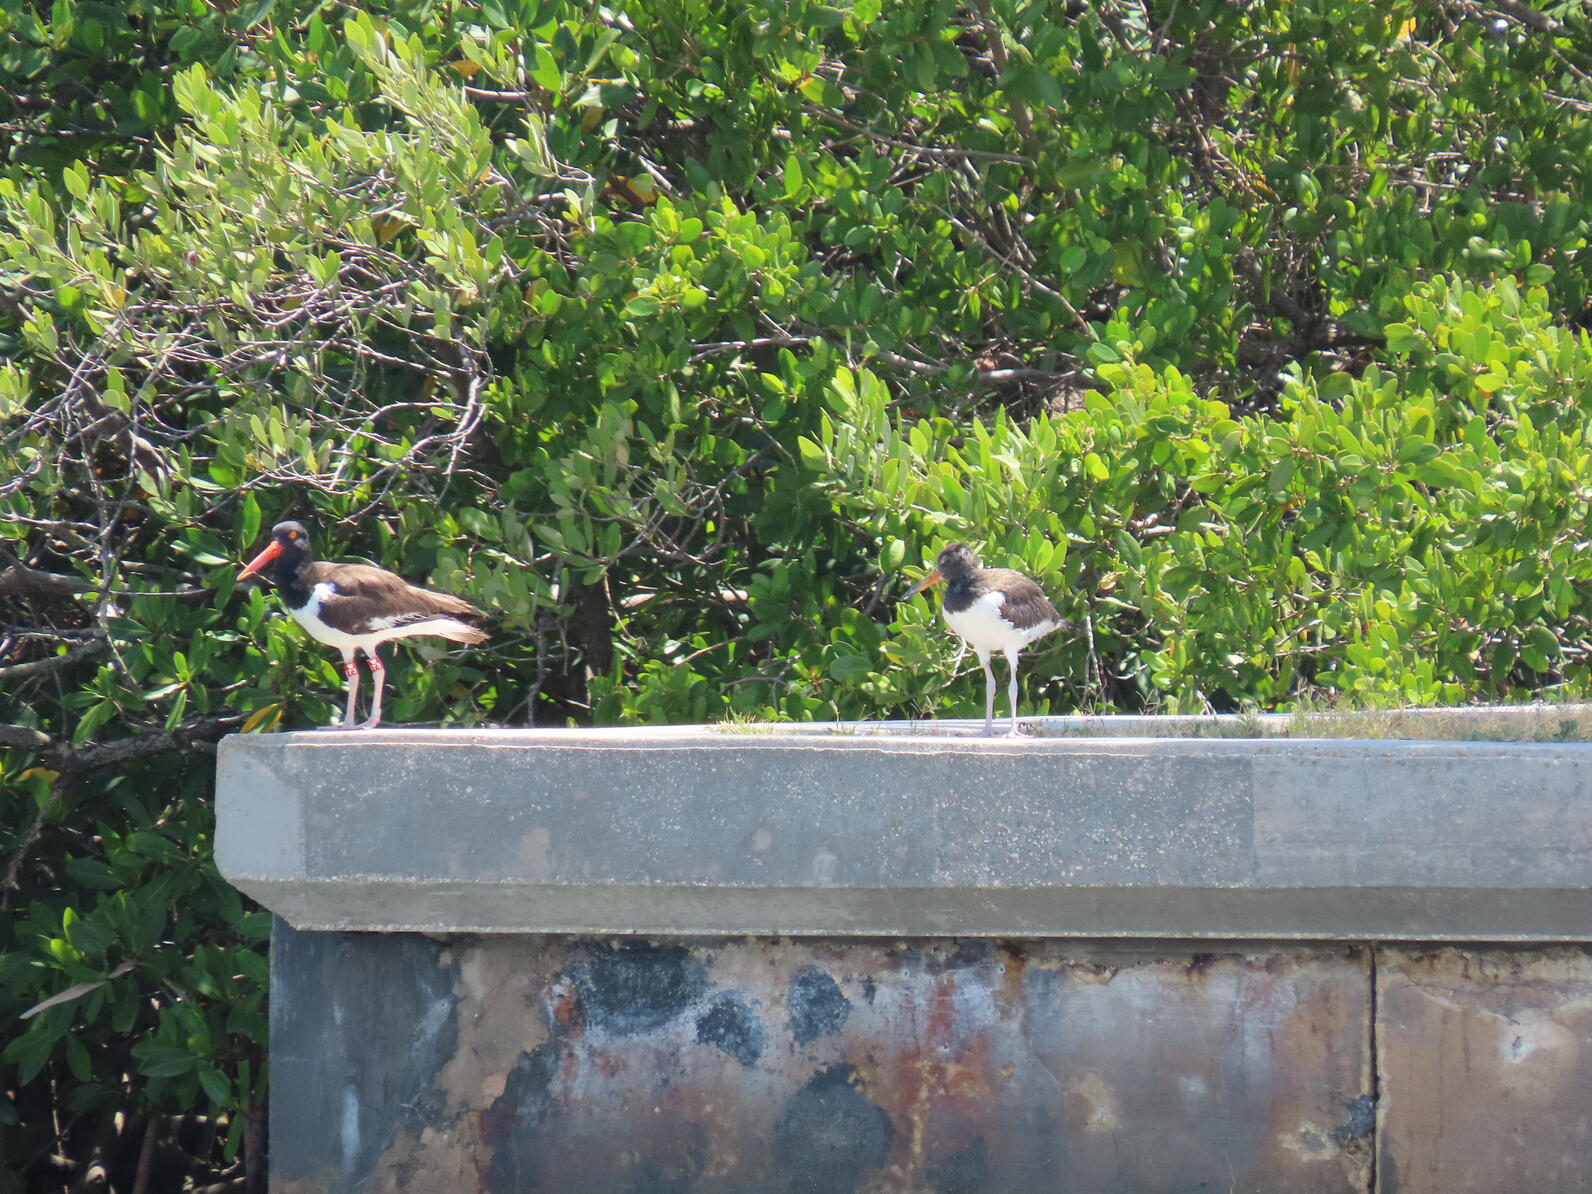 Banded American Oystercatchers left their rooftop nesting site with one fledge in tow.